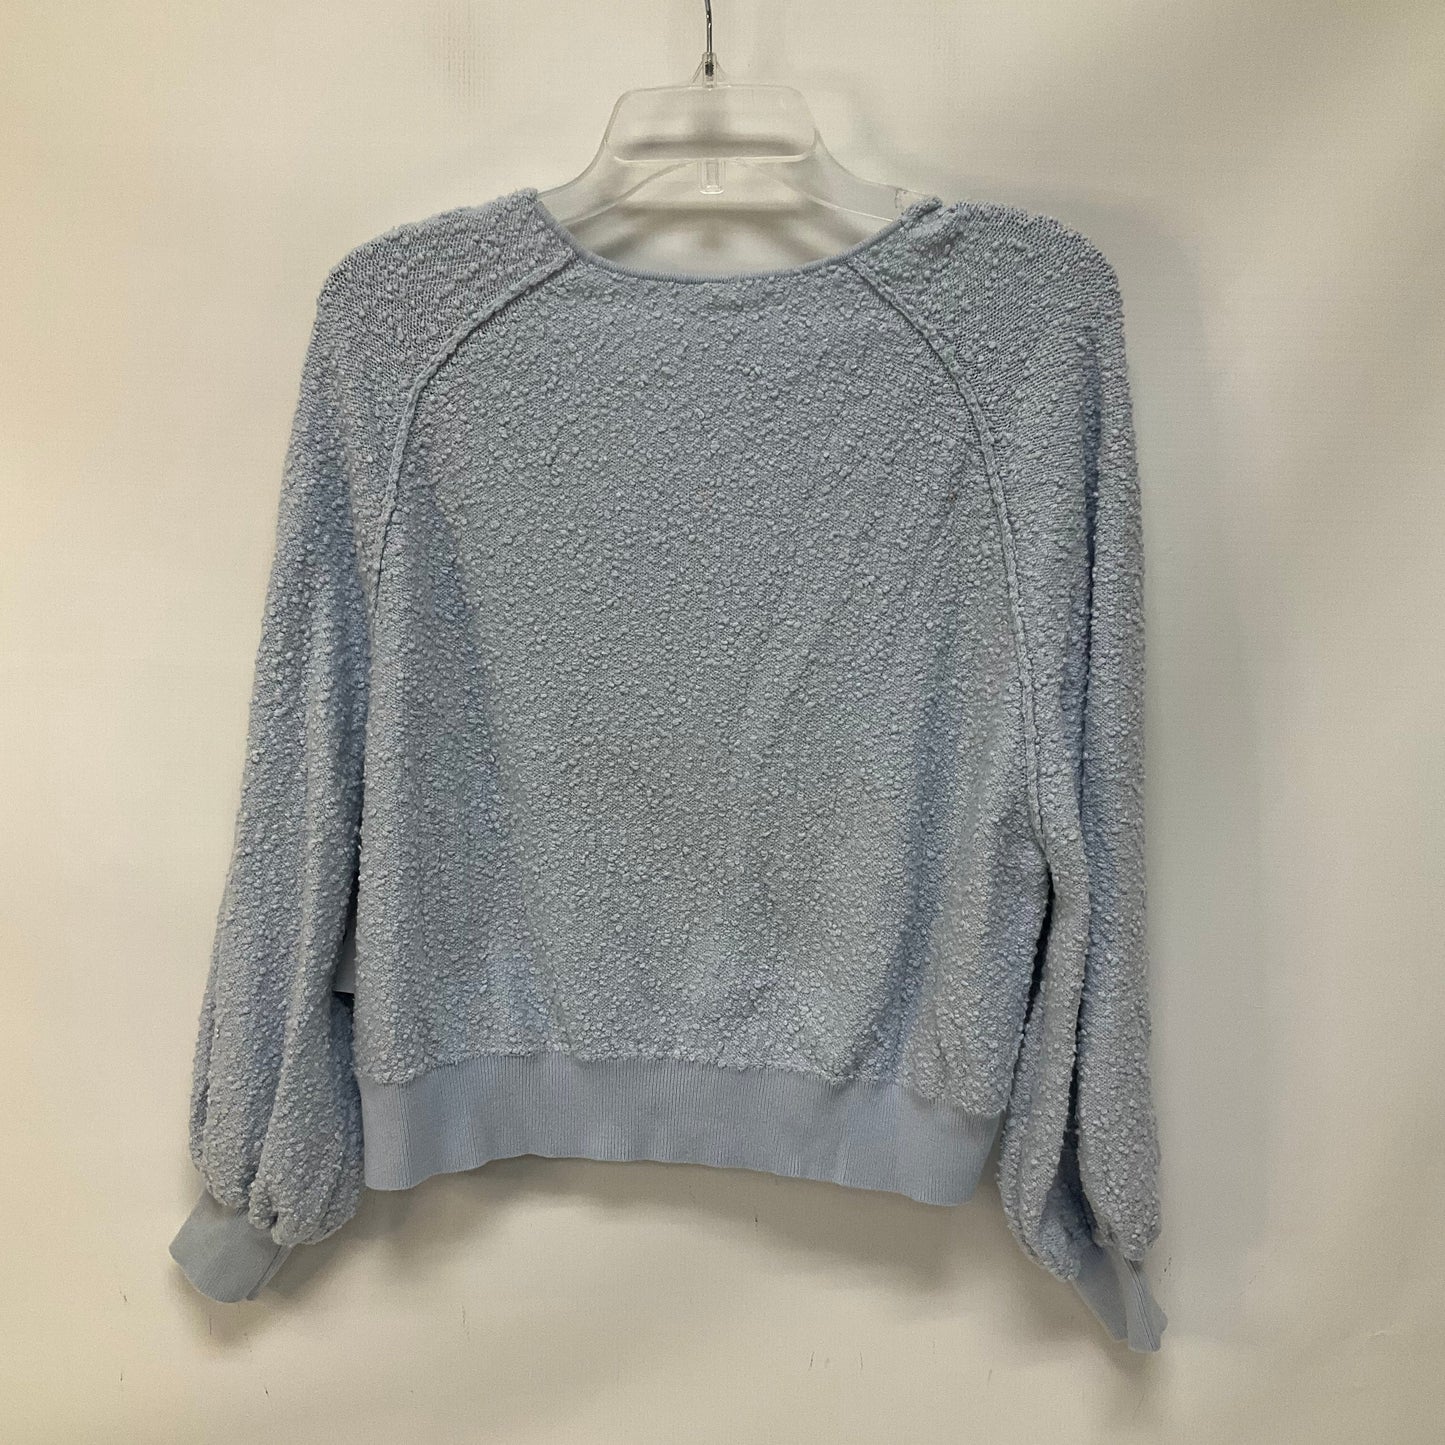 Blue Sweater Free People, Size S